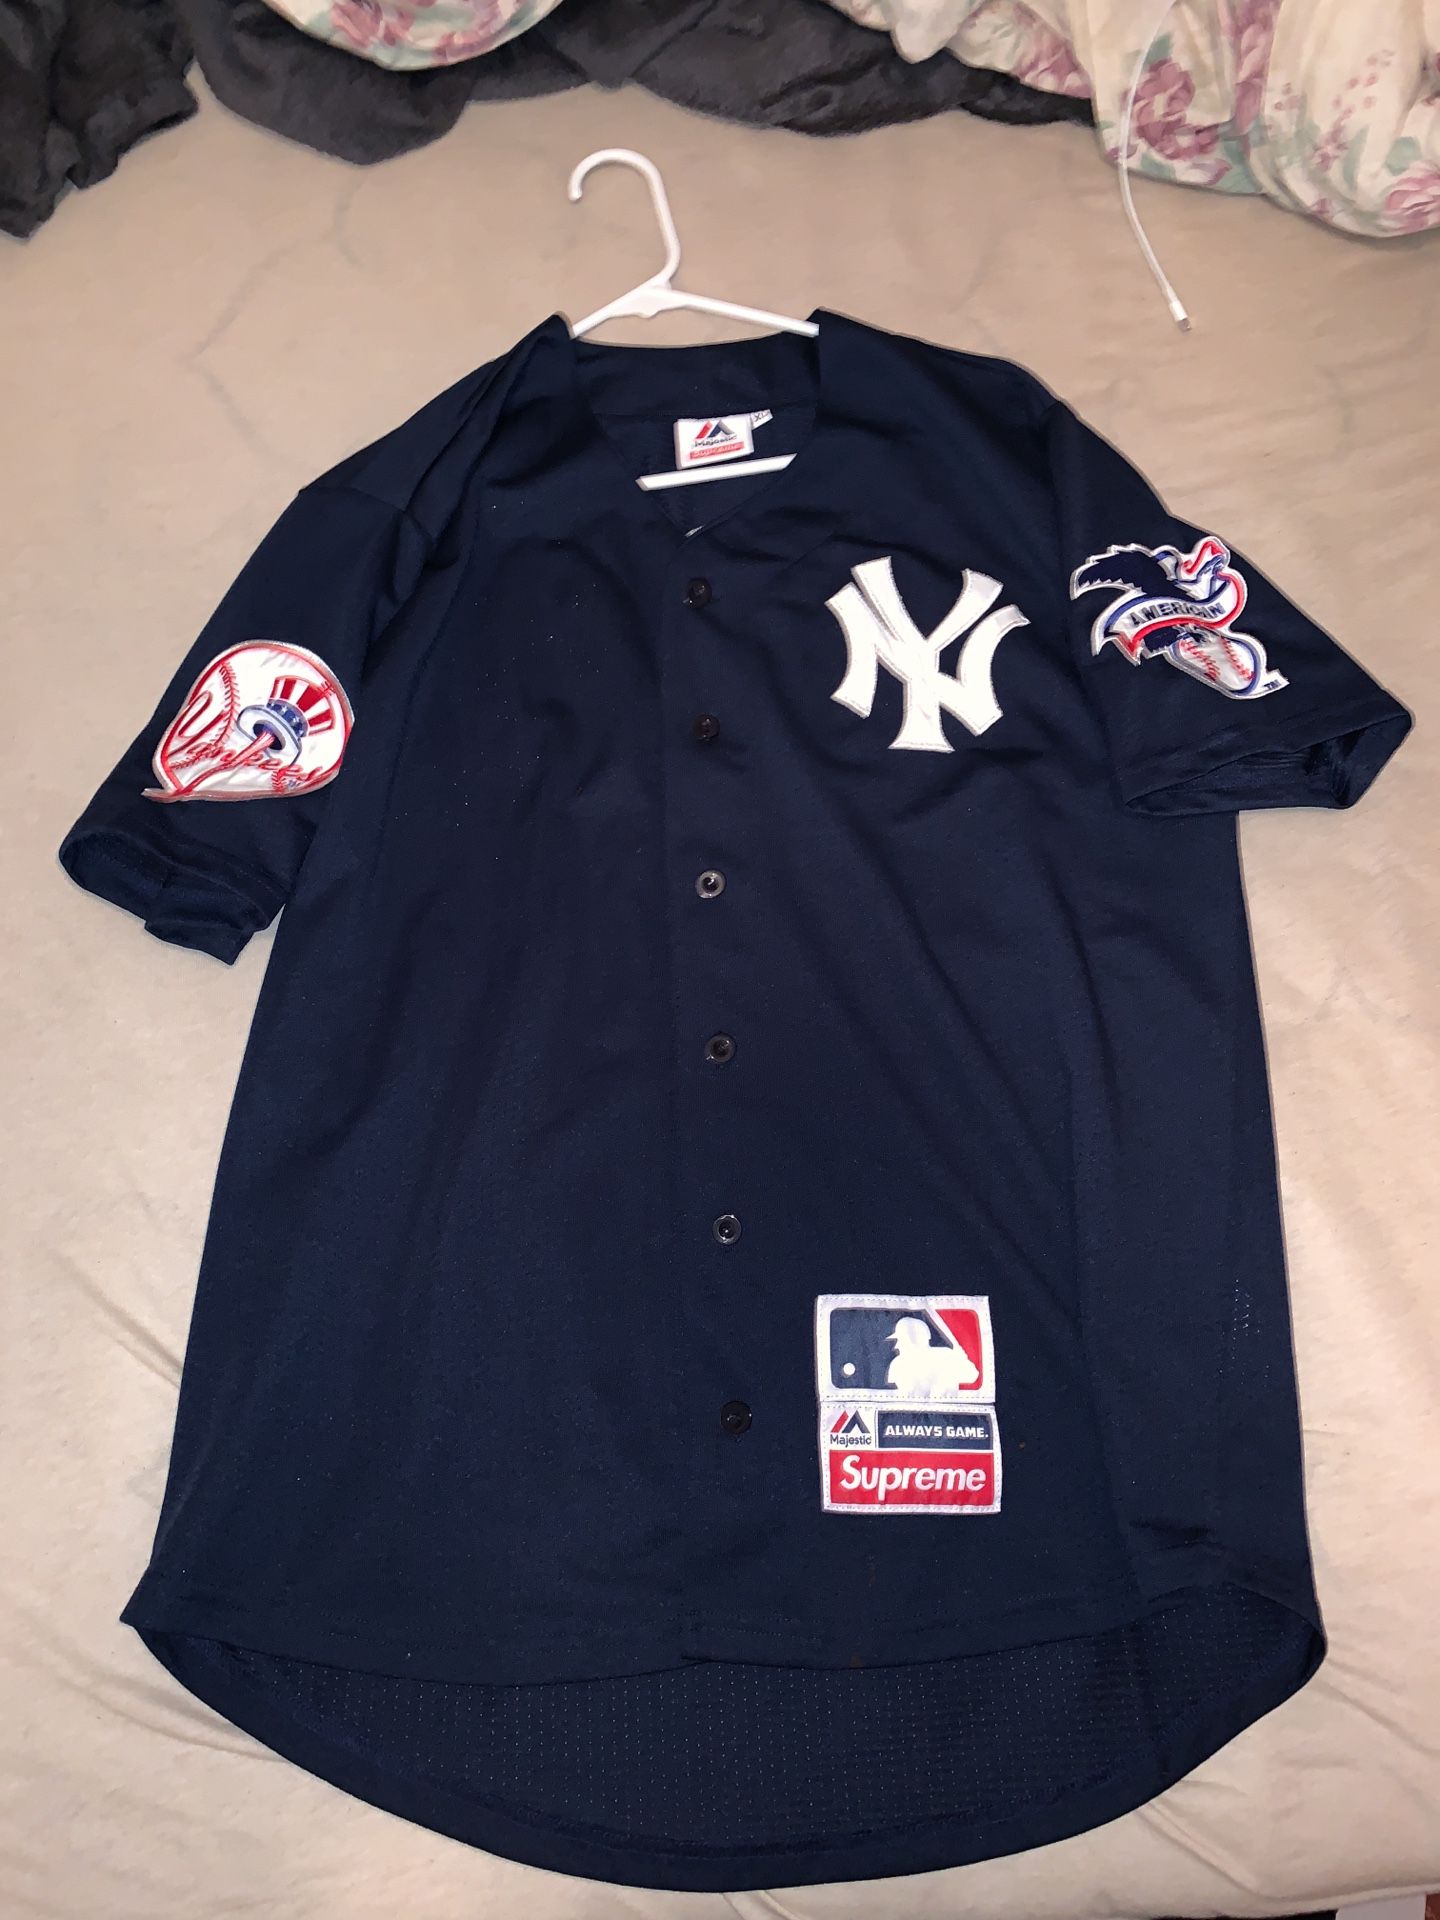 Supreme New York Yankees Jersey for Sale in Bloomington, CA - OfferUp